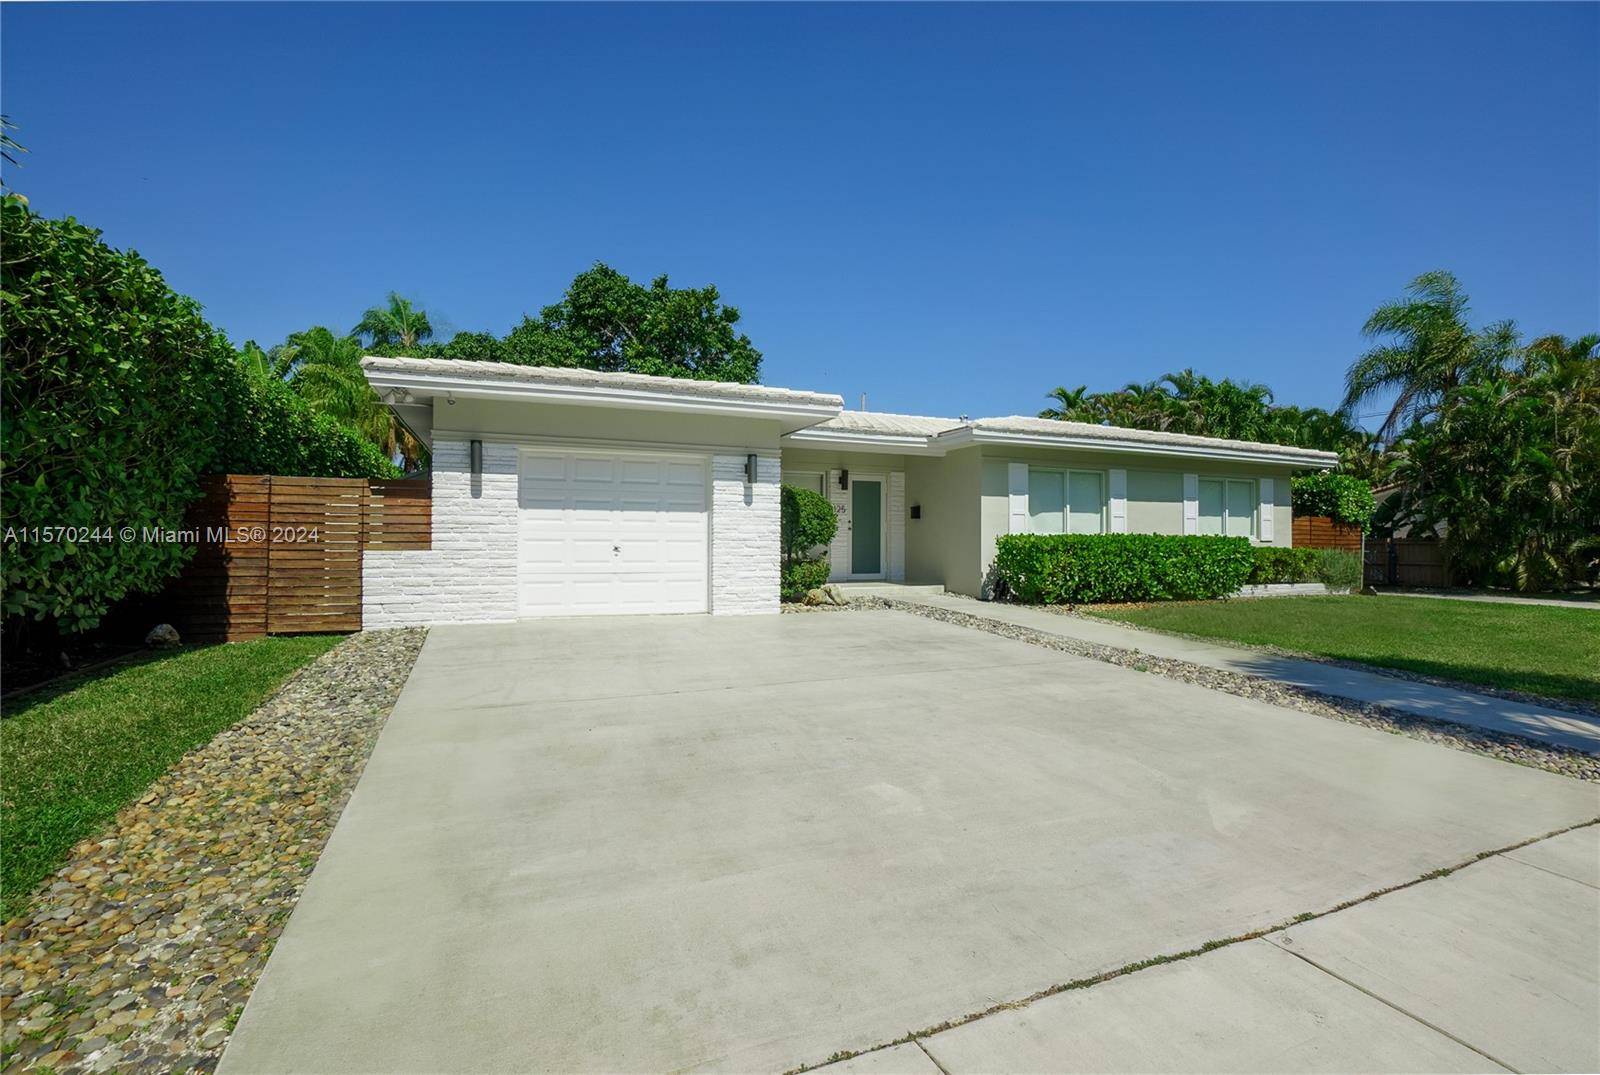 Welcome to your new home in Miami Shores, FL !